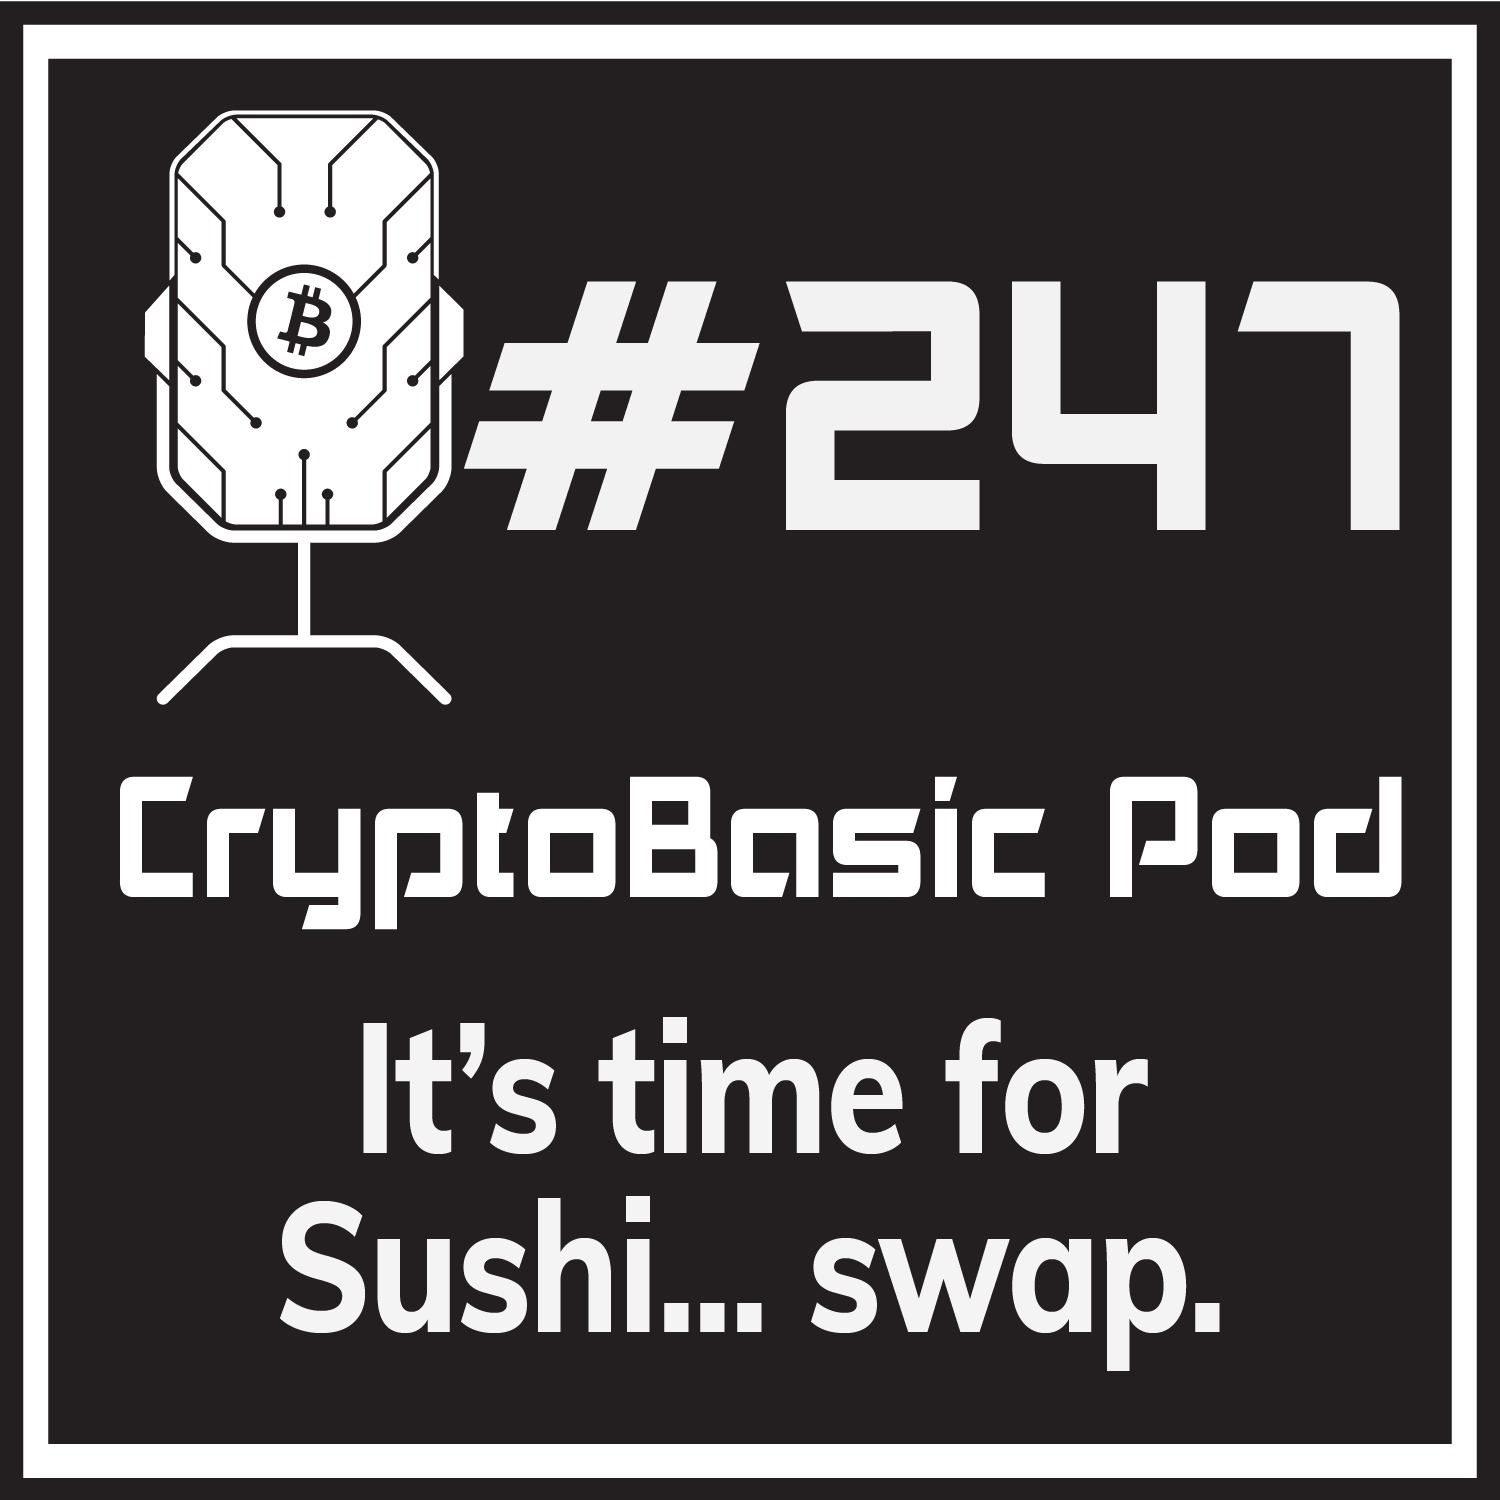 Episode 247 - It's time for Sushi... swap.